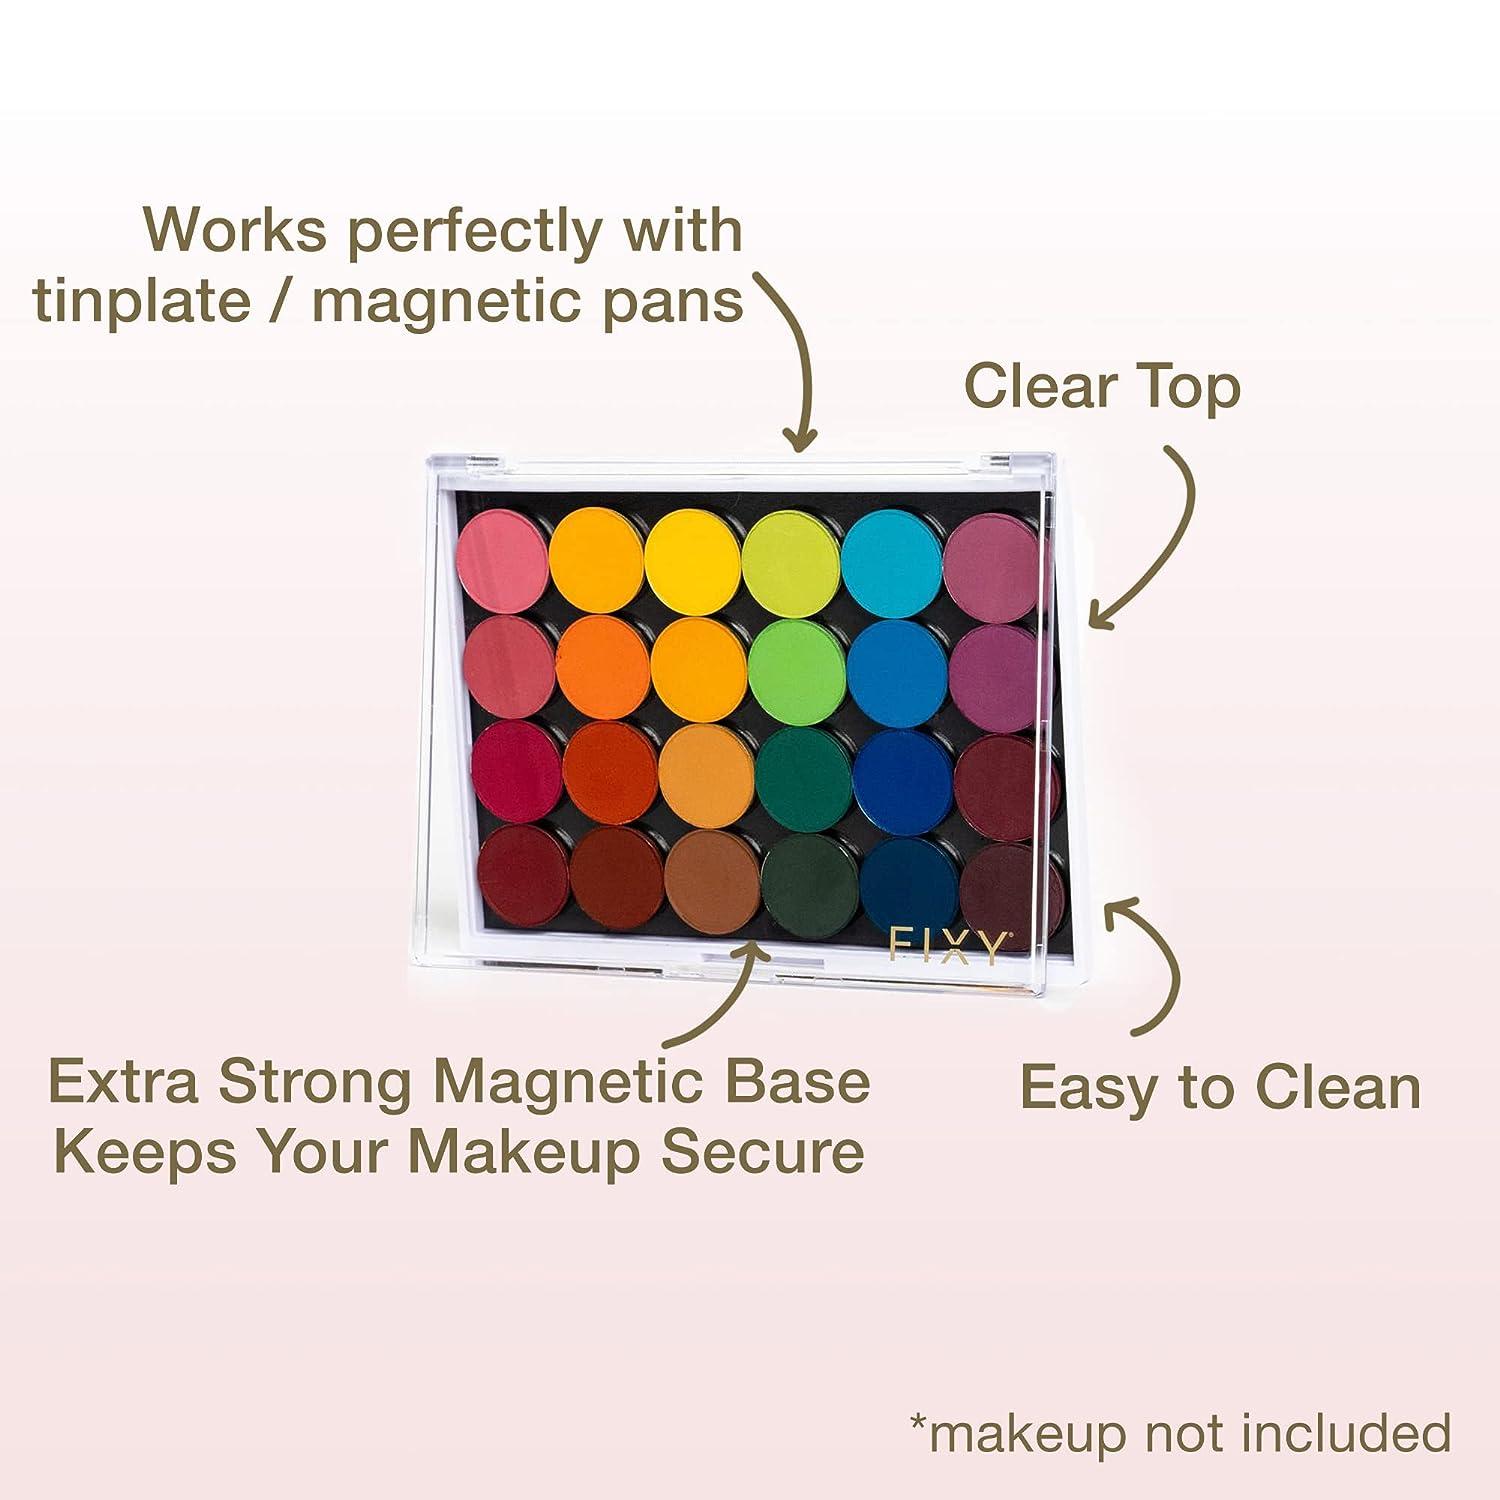 FIXY Empty Magnetic Makeup Palette with Clear Top - Organize